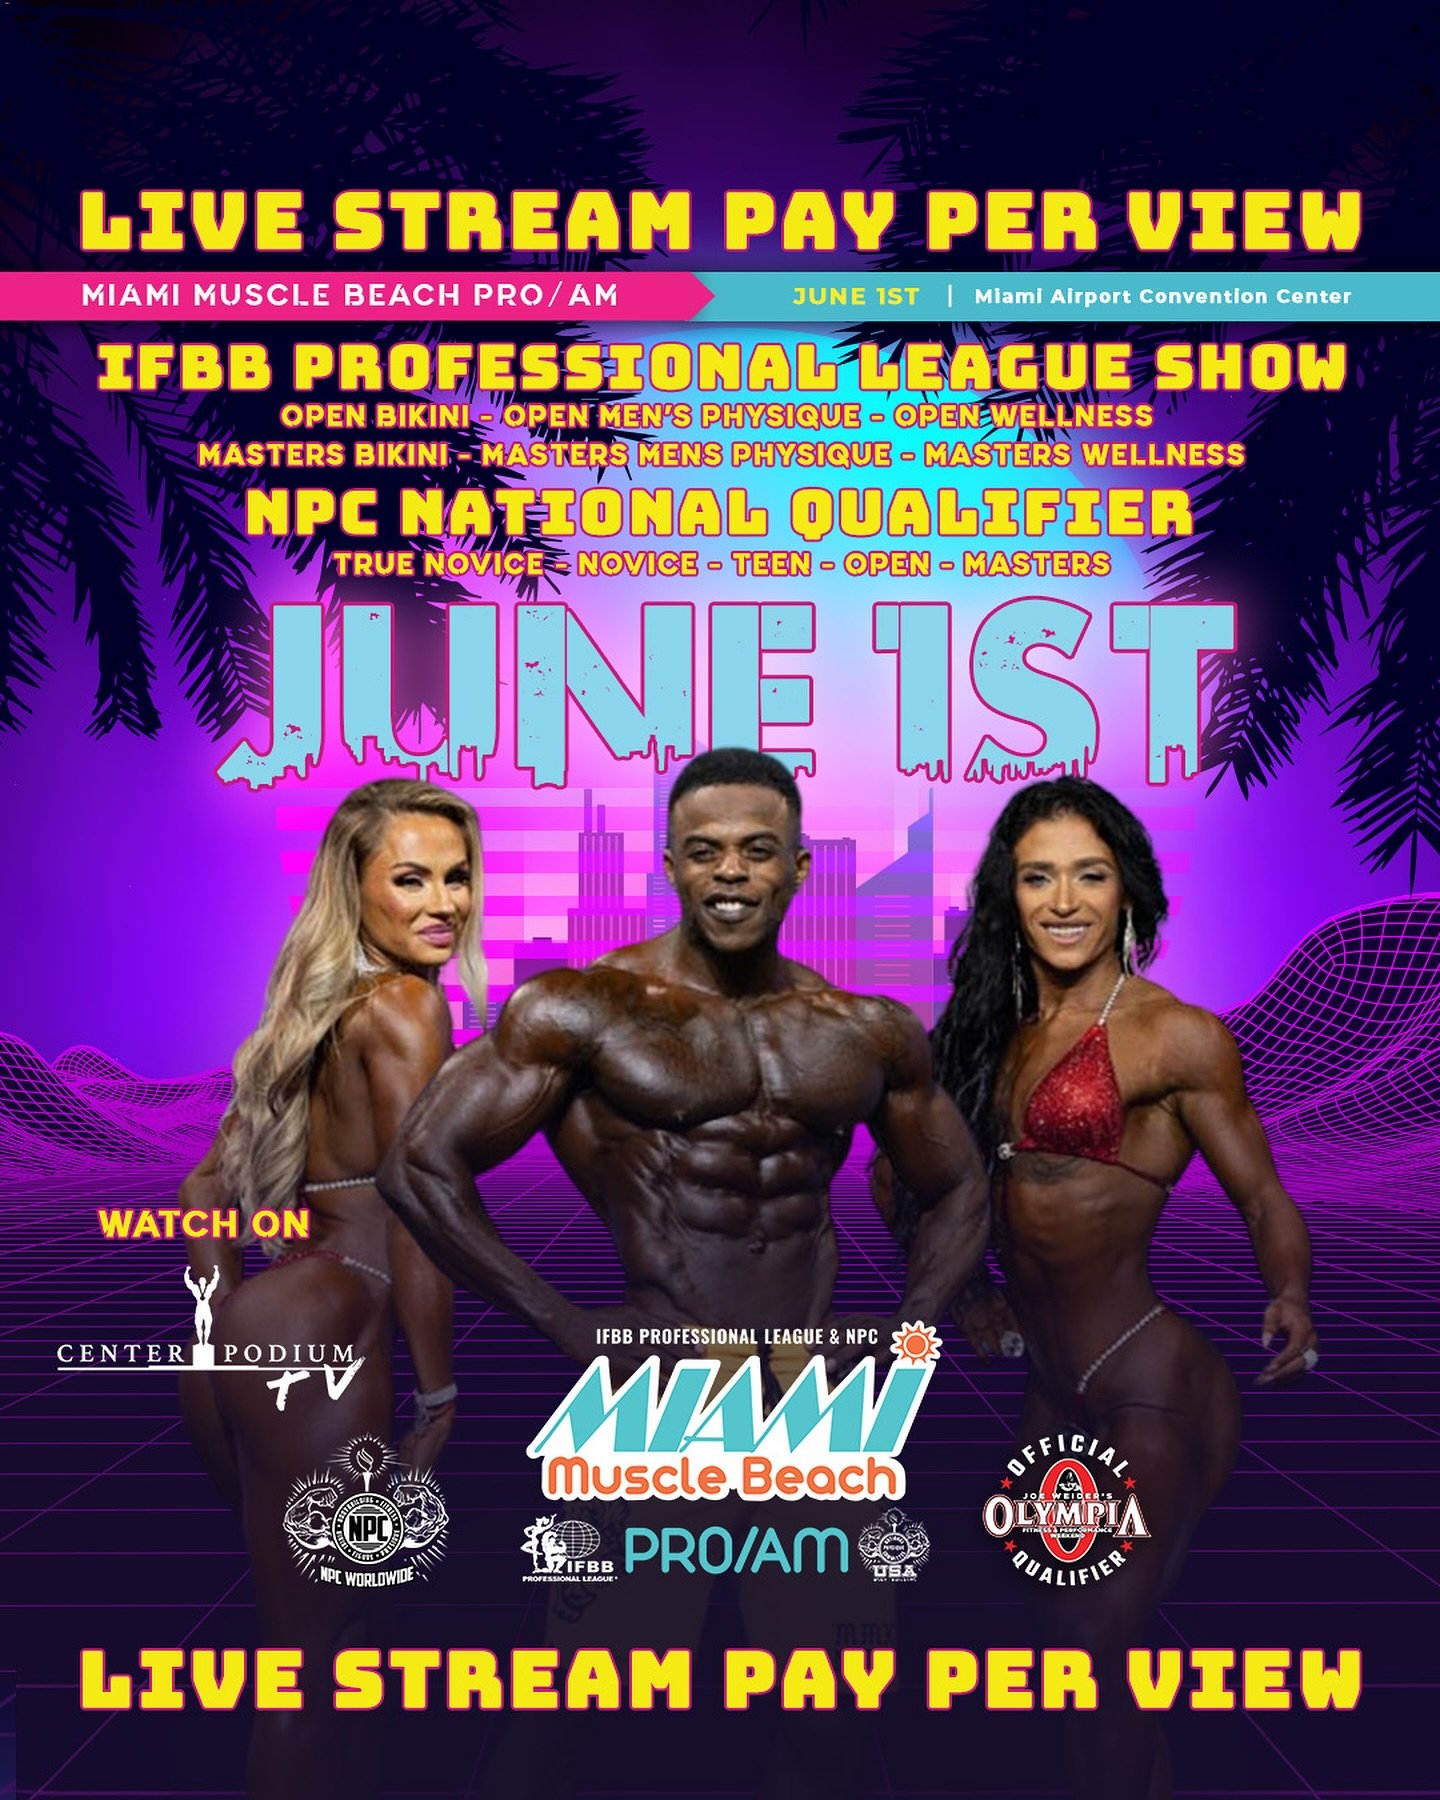 Hey, #FitFam! 📢

Get pumped for the ultimate bodybuilding showdown in Miami, coming to your screens! The Miami Muscle Beach Pro/Am, the ultimate #ifbbpro &amp; #npc event in #Miami, is live streaming now! 🔥

Don&rsquo;t let this epic display of str